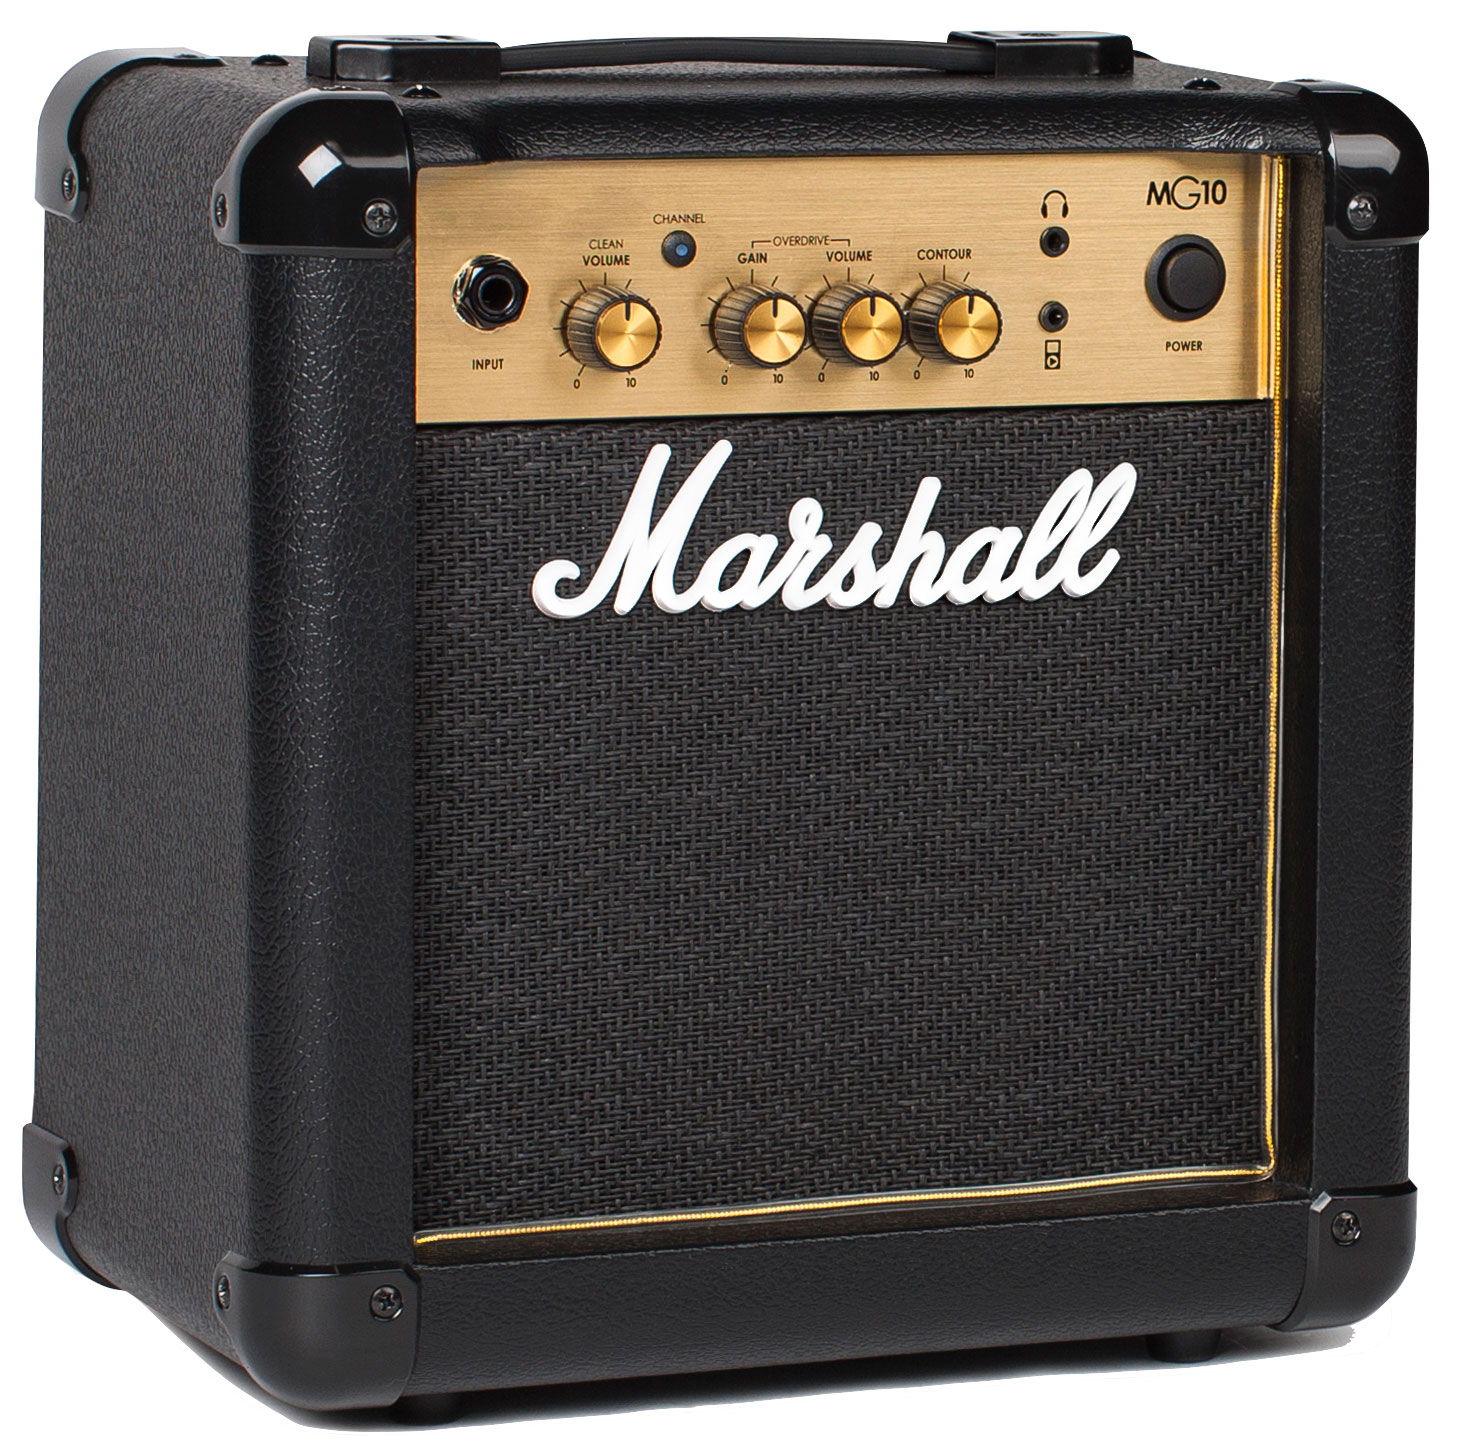 Eastone Sdc70 +marshall Mg10g Gold +cable +housse +courroie +mediators - Black - Packs guitarra eléctrica - Variation 6